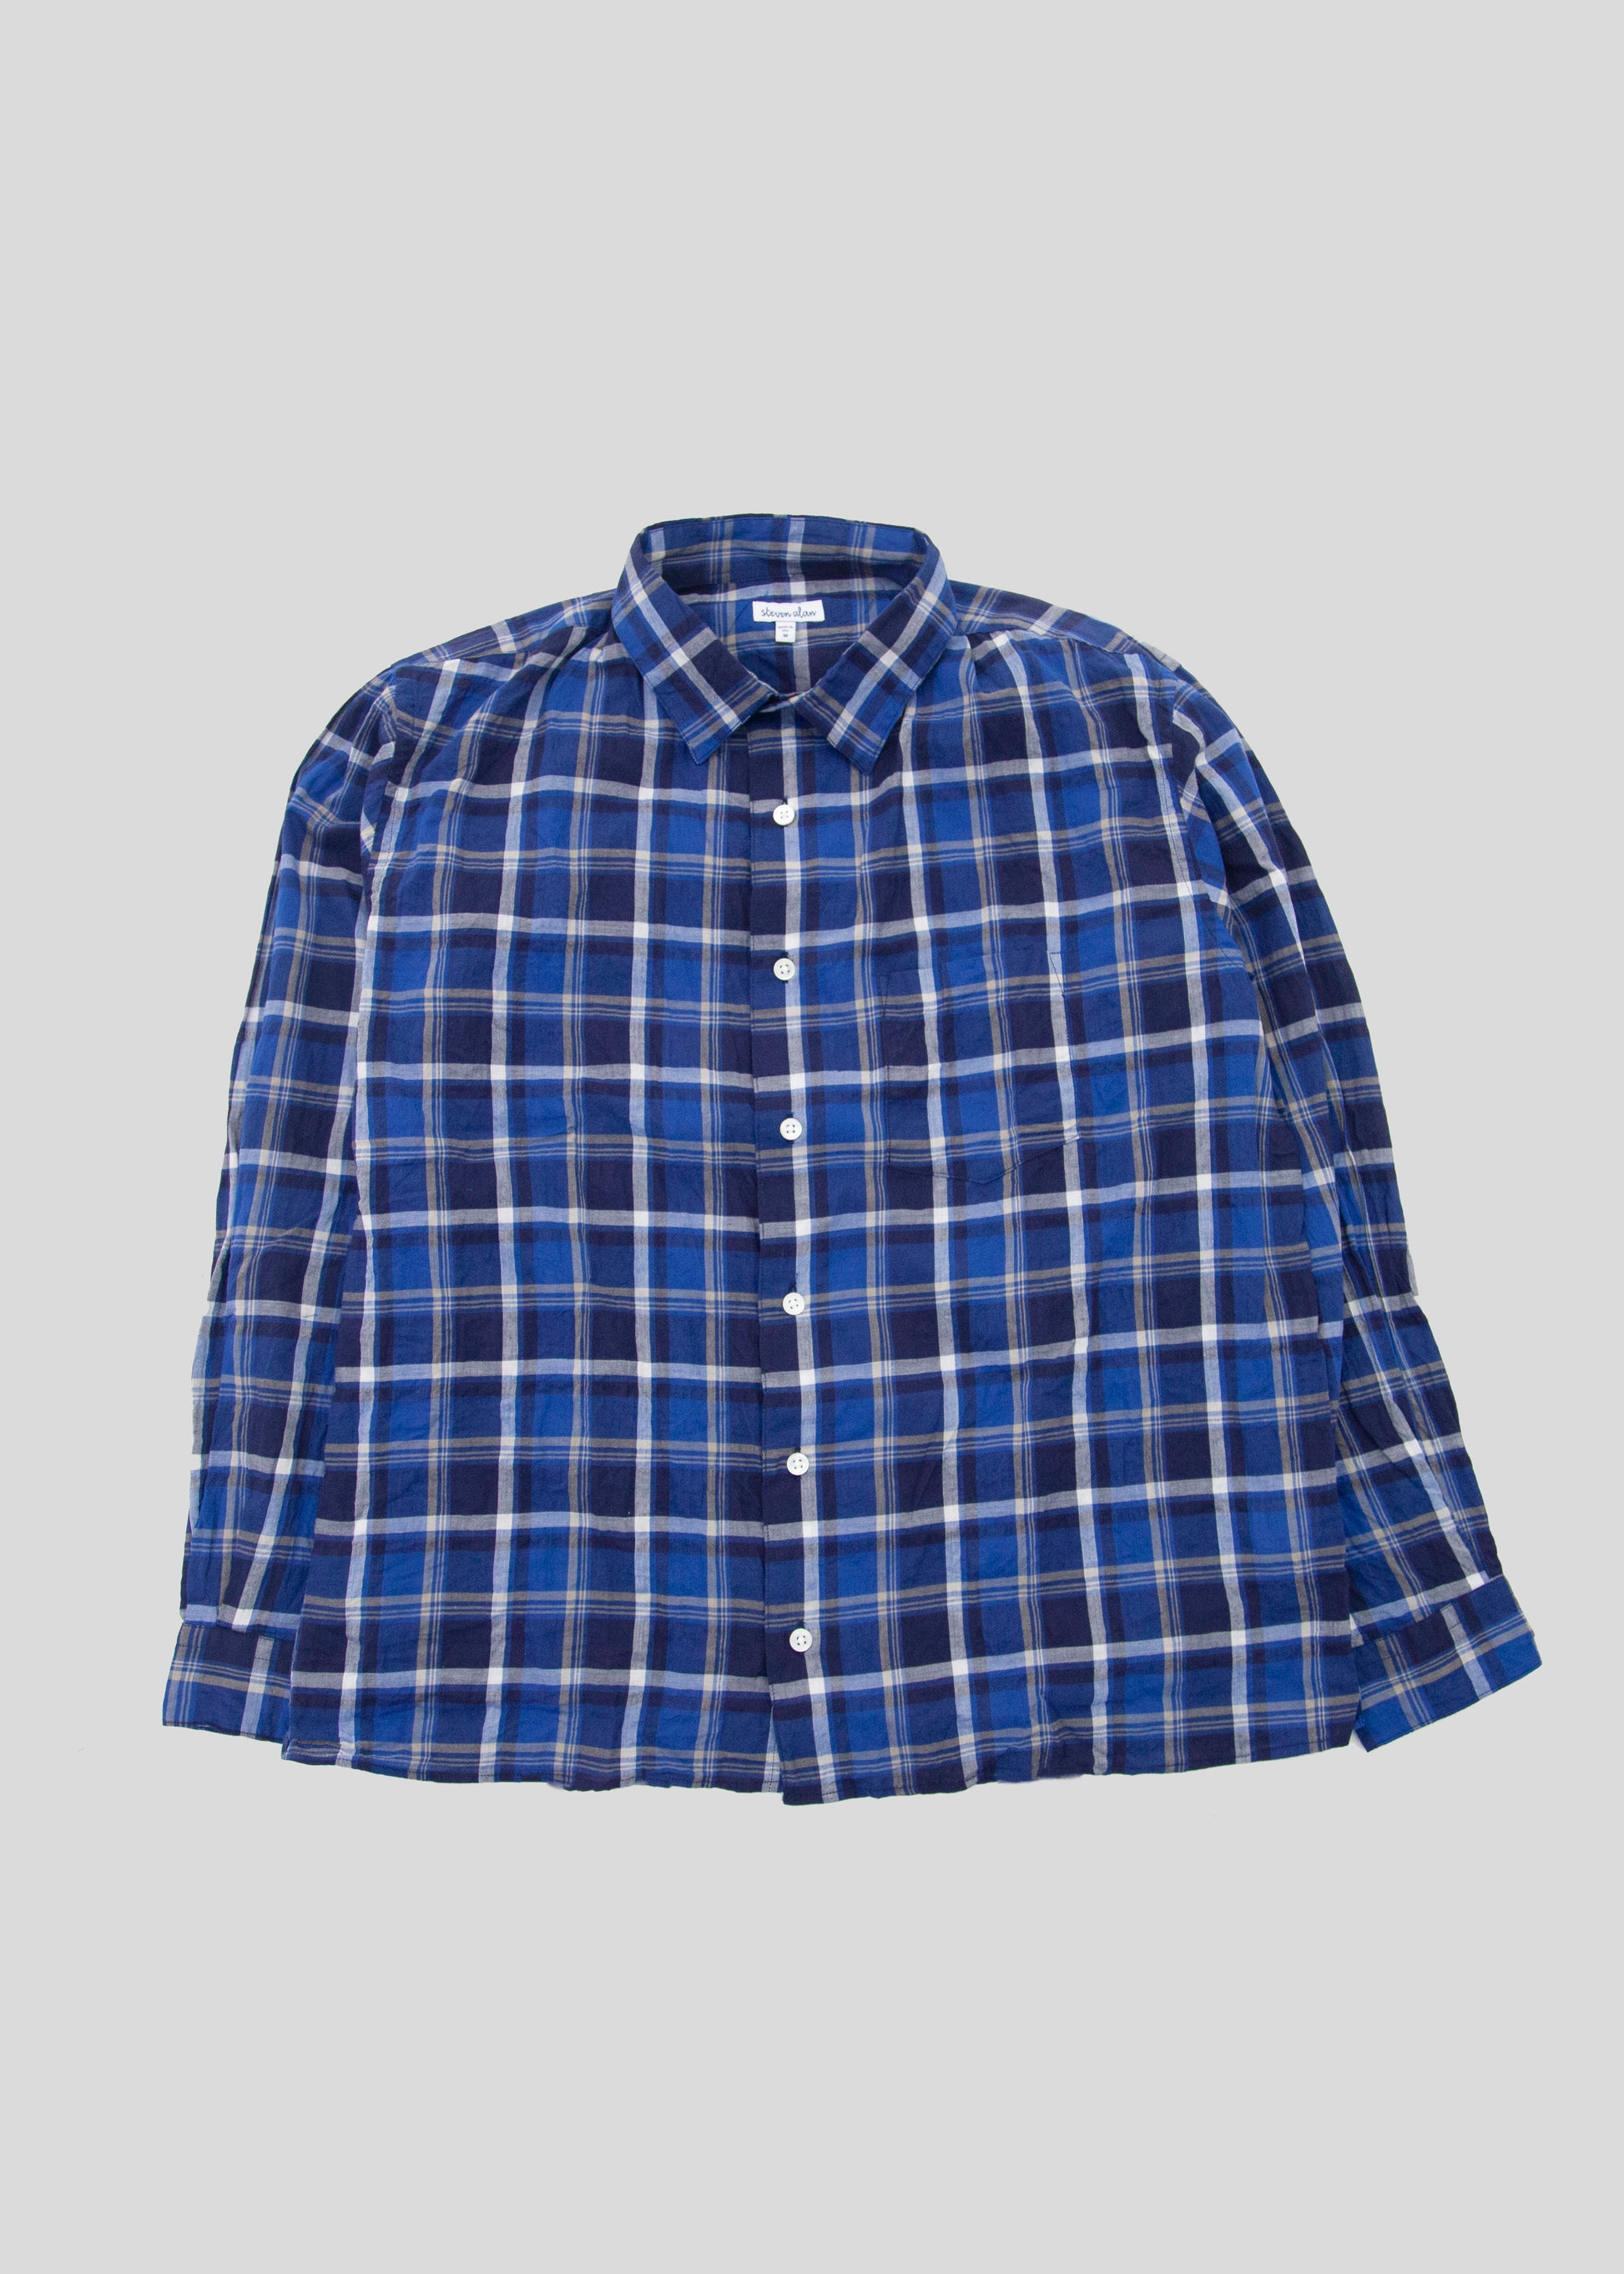 Front flat lay of notch shirt in color blue check